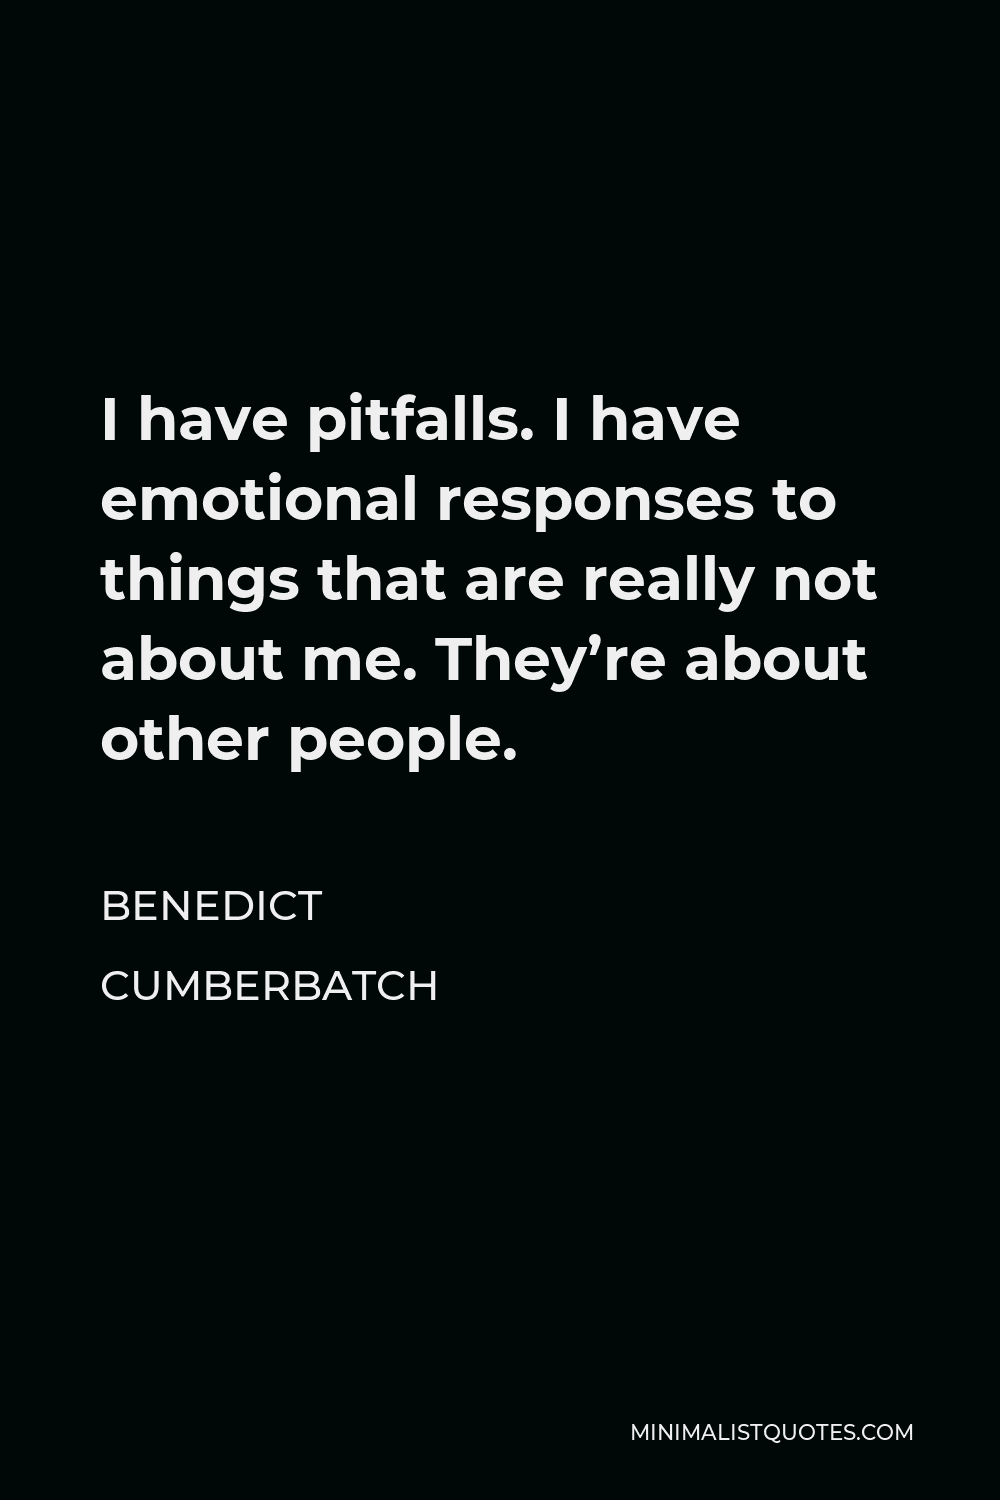 Benedict Cumberbatch Quote - I have pitfalls. I have emotional responses to things that are really not about me. They’re about other people.